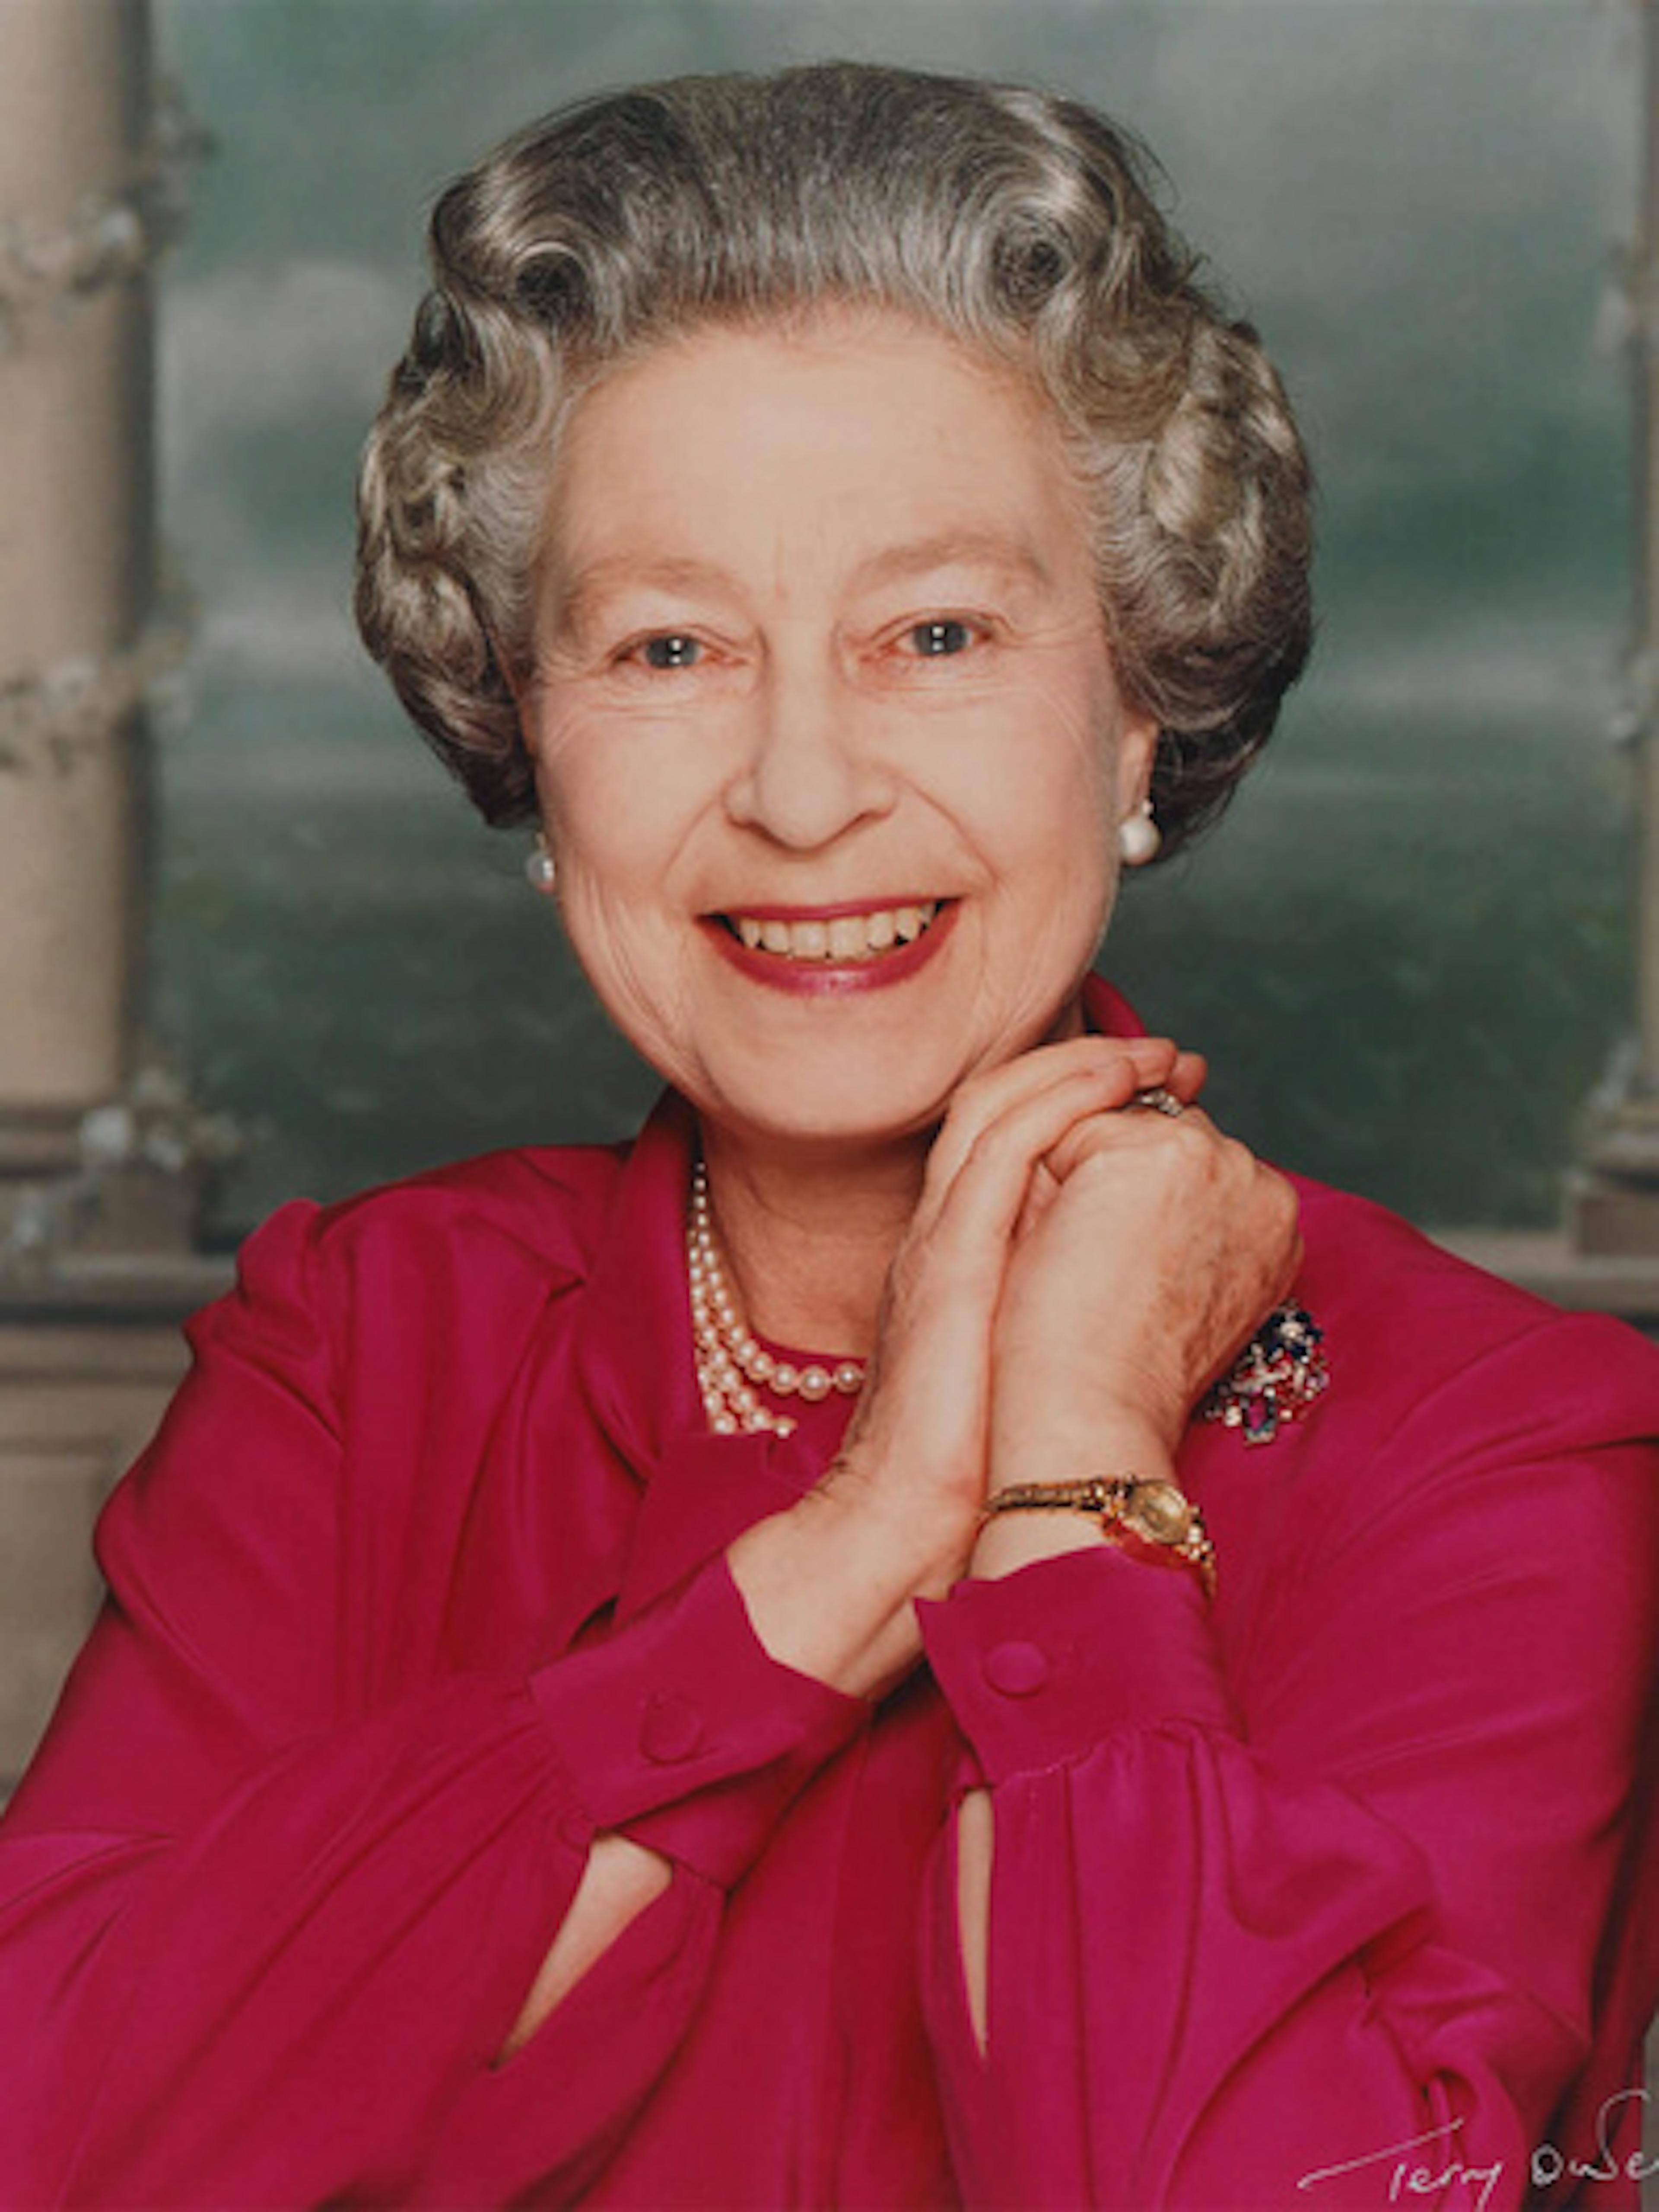 A Famous portrait of the Queen from 1992 by Terry Owens, in which she wears an Omega Ladymatic watch.